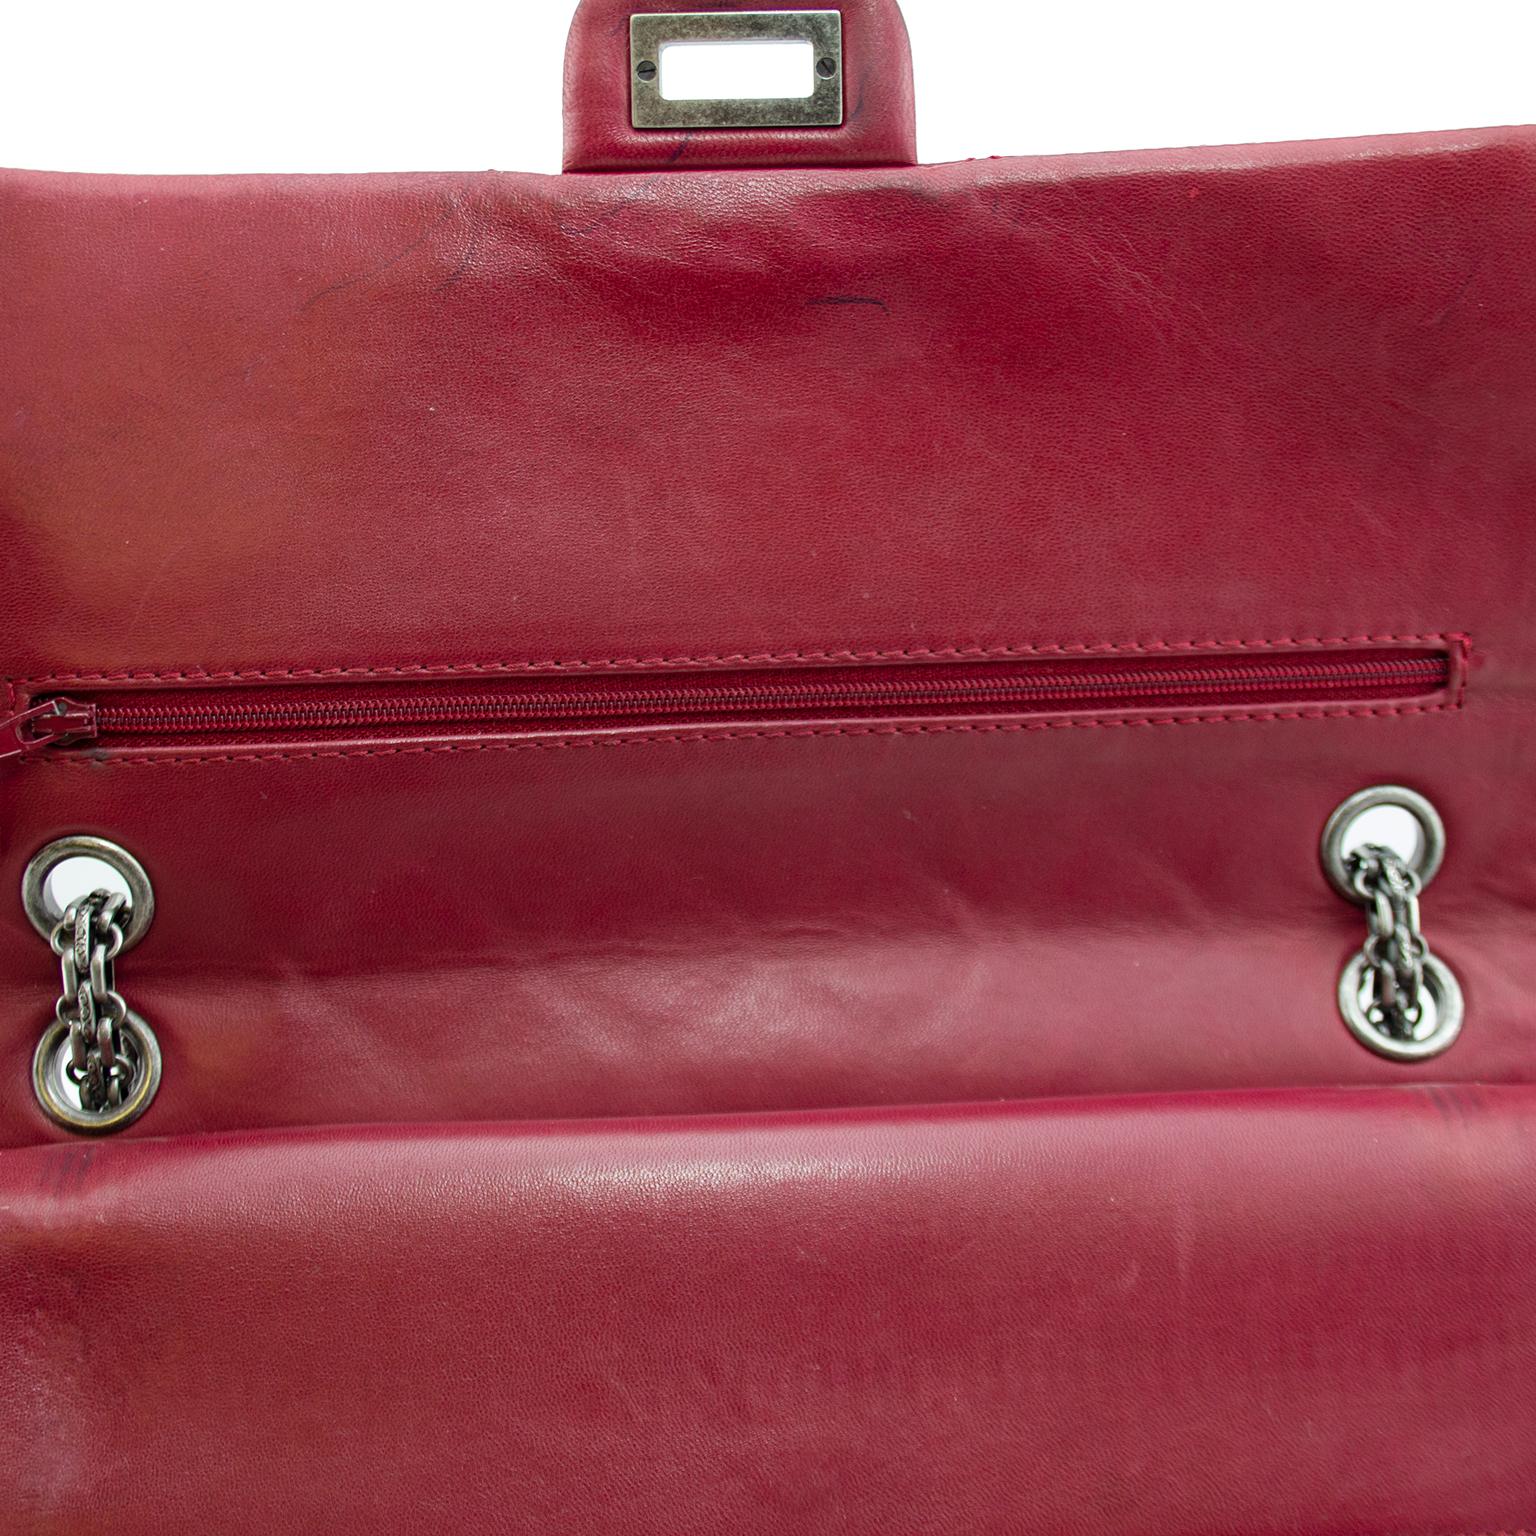 Chanel Red Quilted Patent Leather Reissue 2.55 Bag with Mademoiselle Lock  3